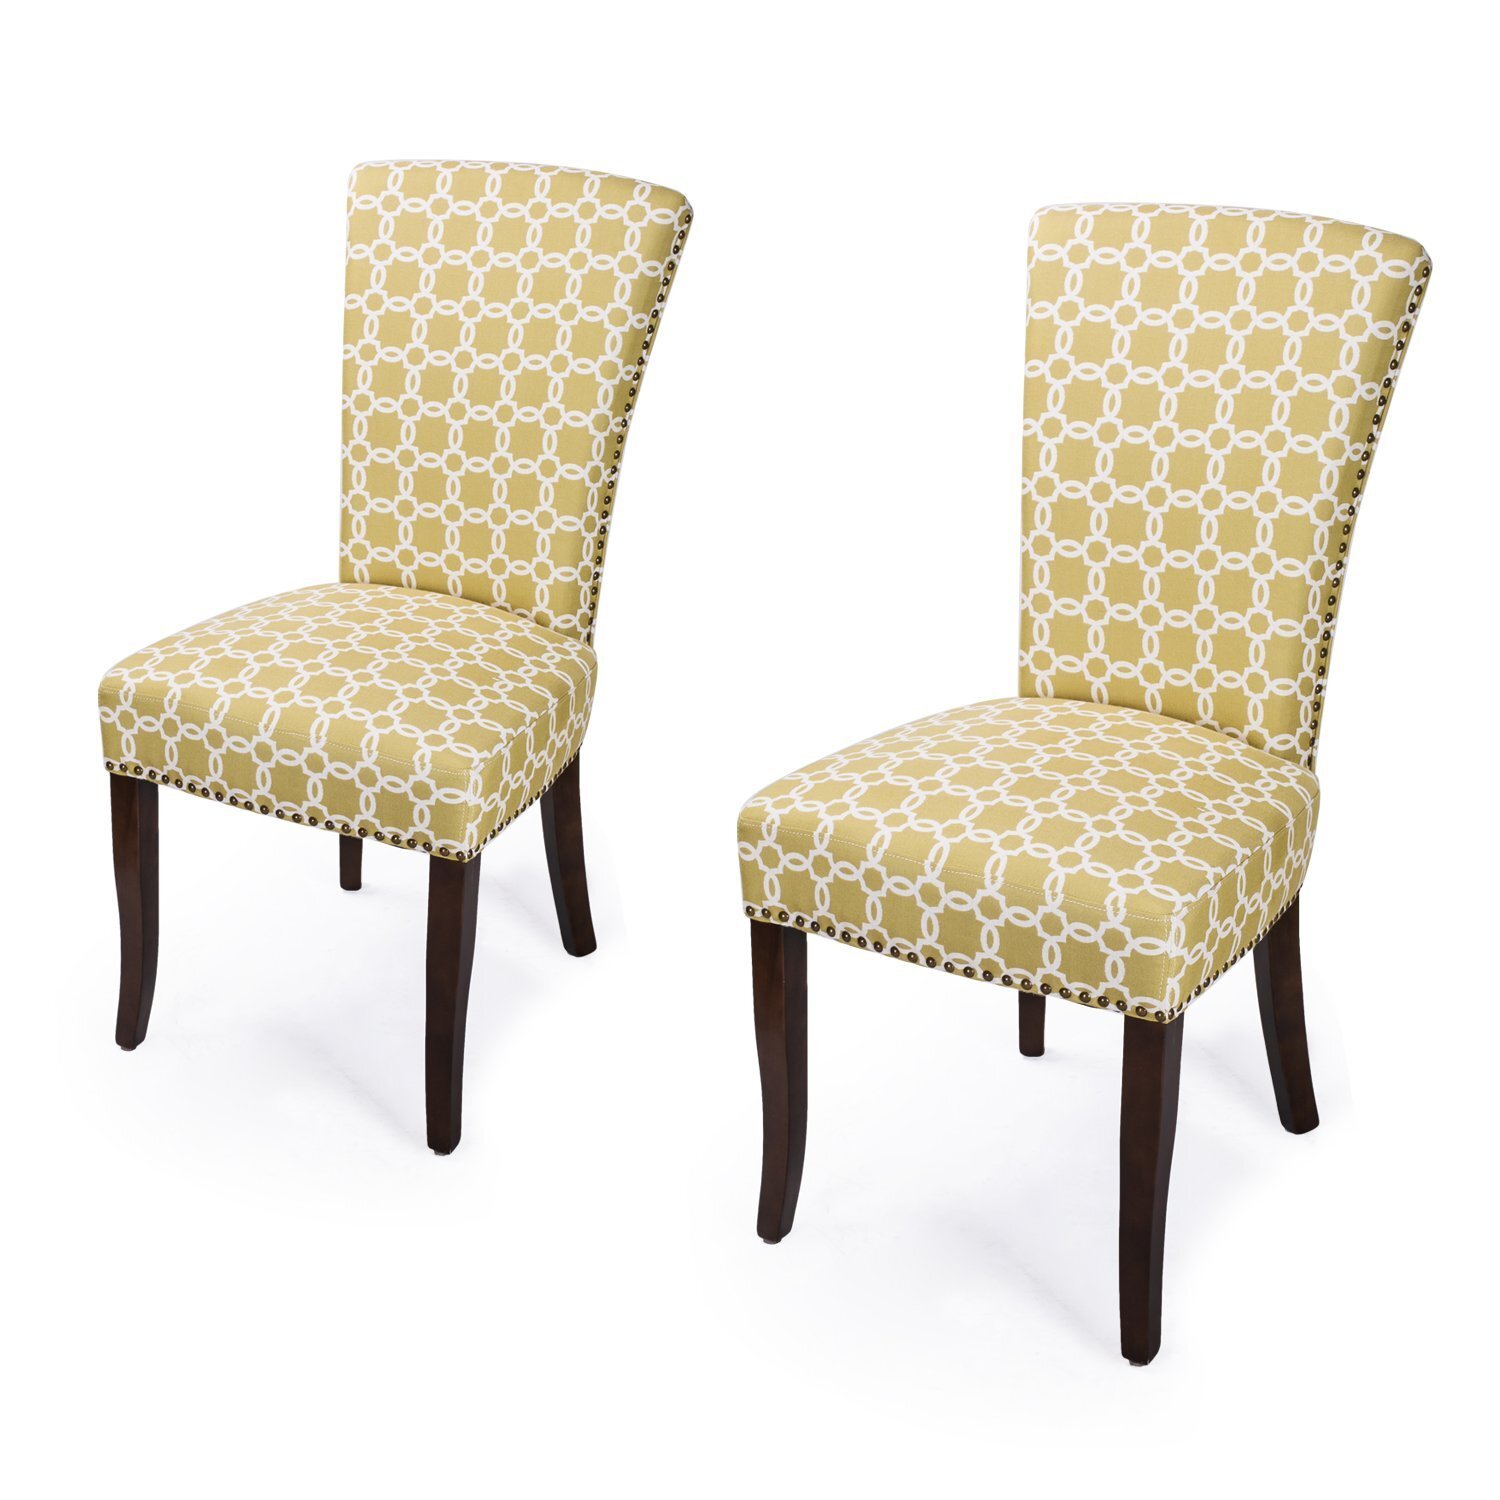 AdecoTrading Parsons Chair & Reviews | Wayfair